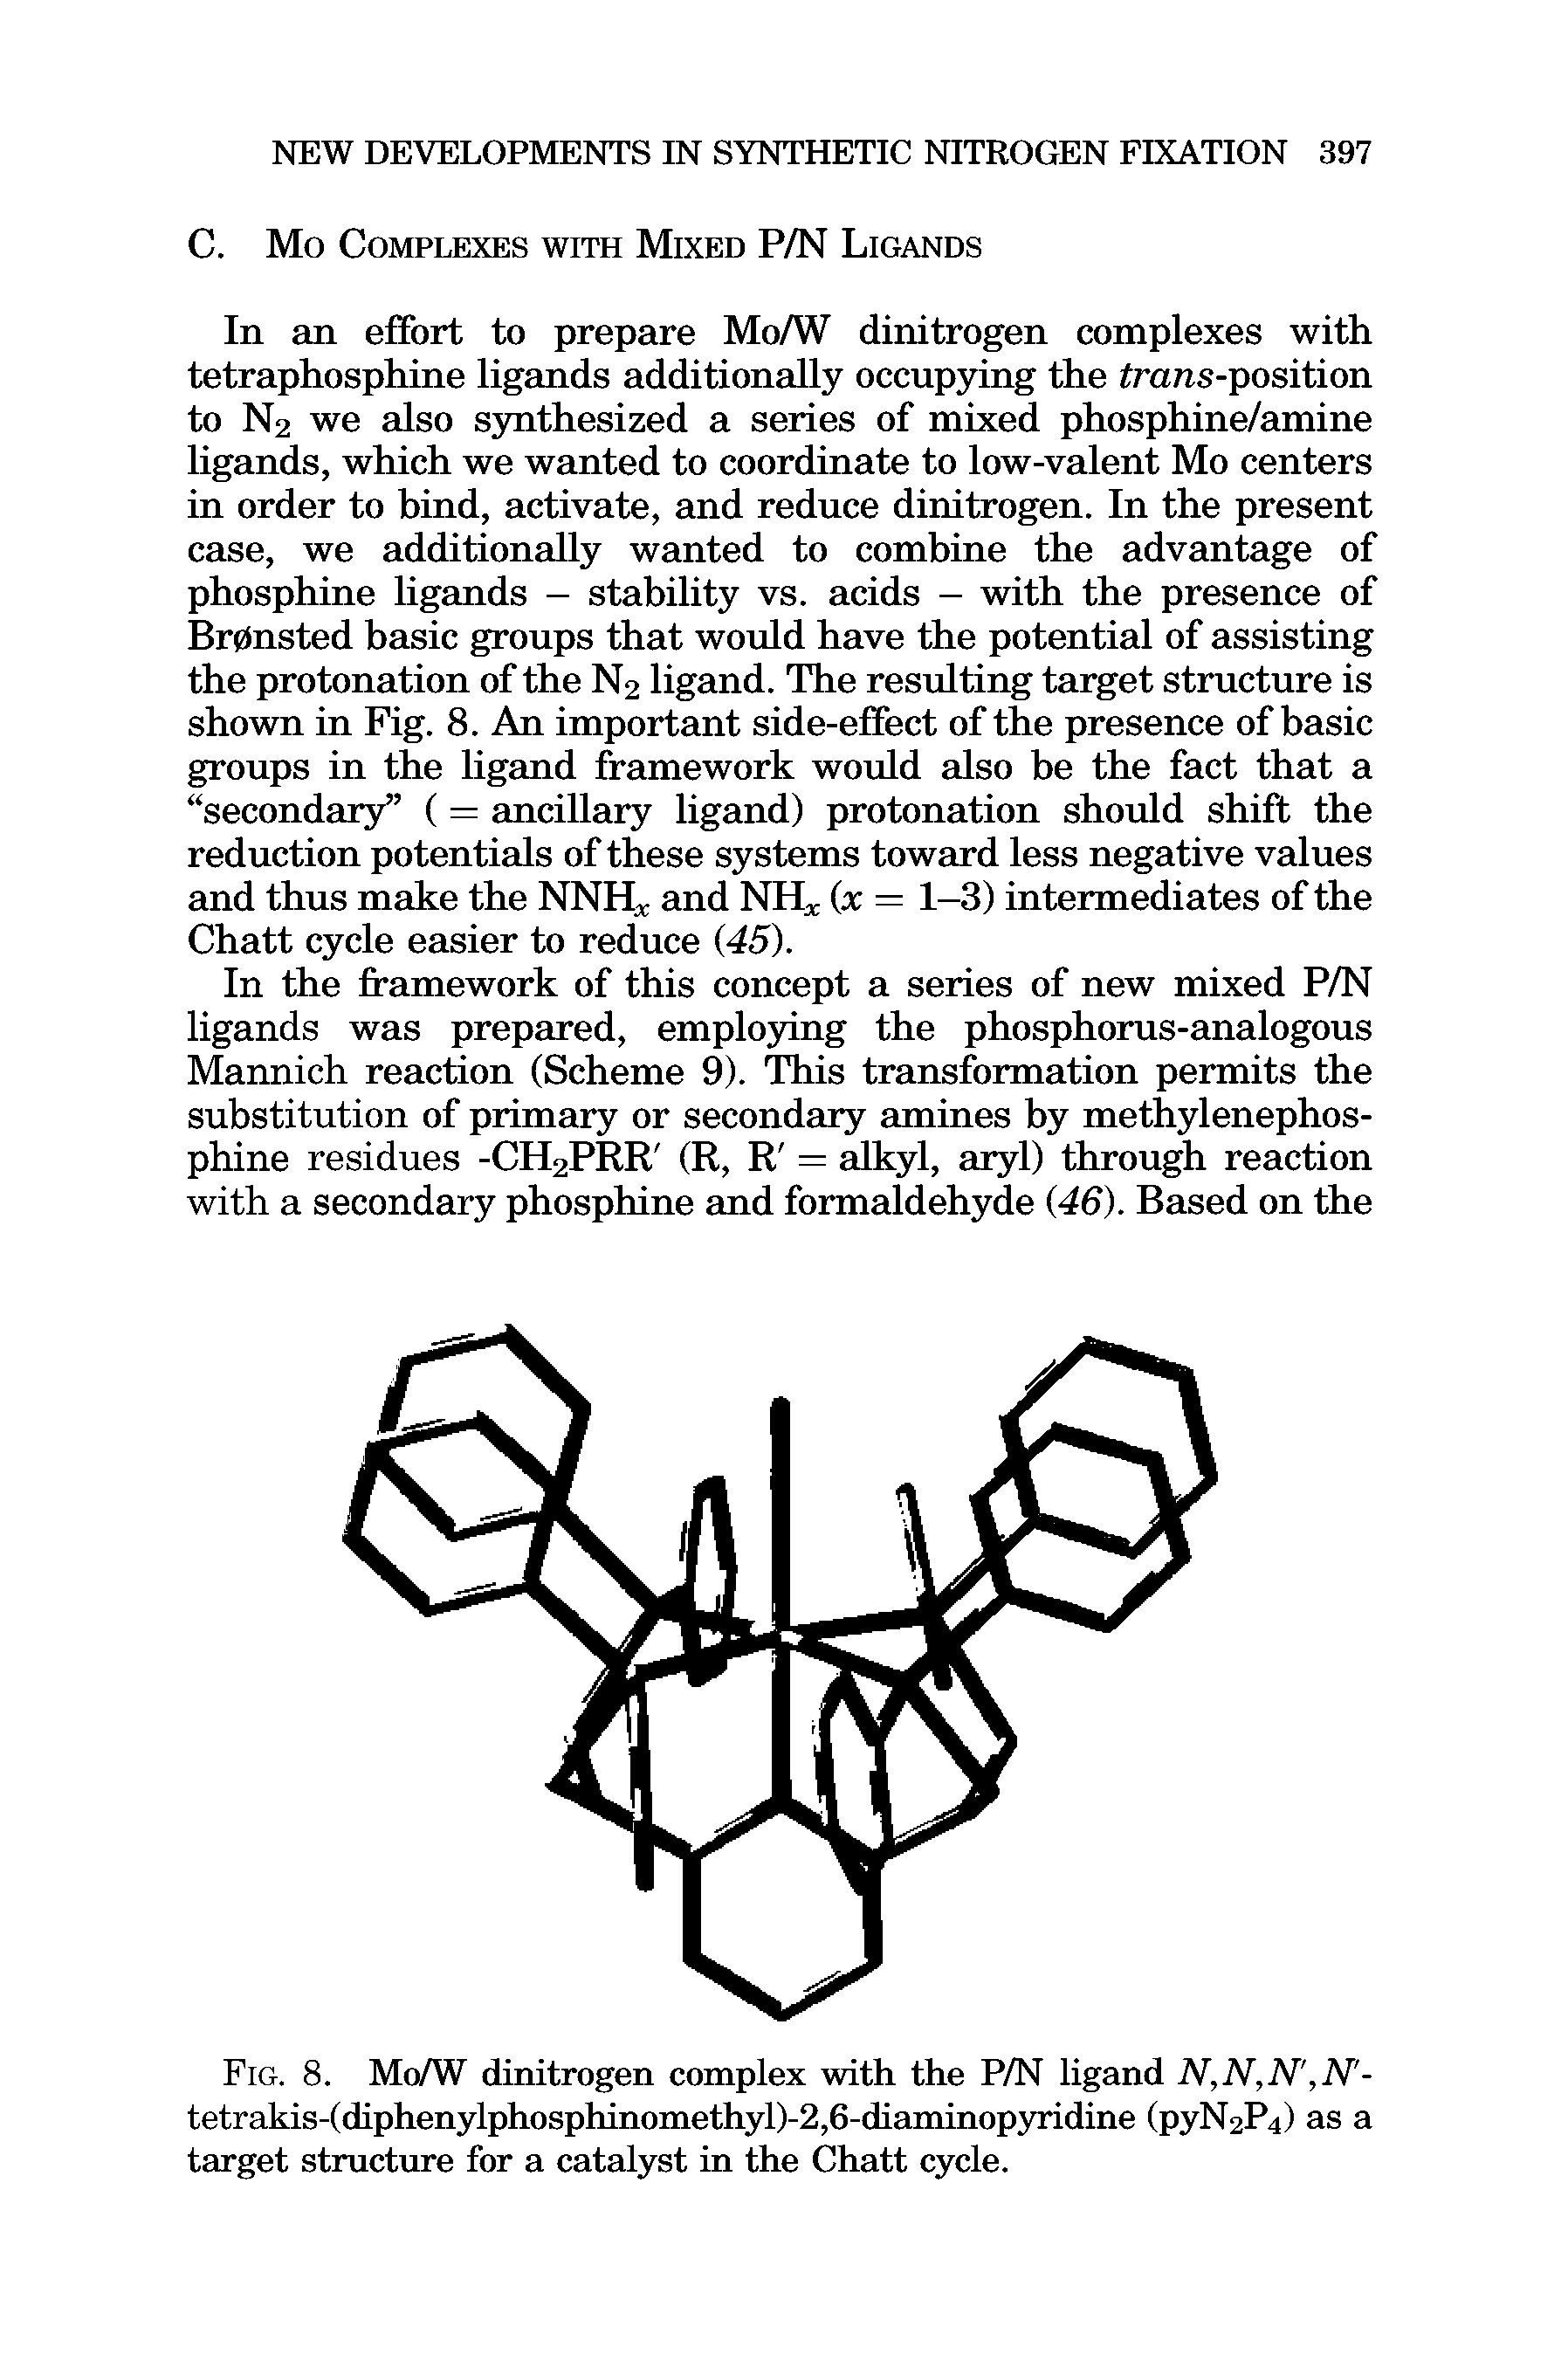 Fig. 8. Mo/W dinitrogen complex with the P/N ligand N,N,N, N -tetrakis-(diphenylphosphinomethyl)-2,6-diaminopyridine (pyN2P<i) as a target structure for a catalyst in the Chatt cycle.